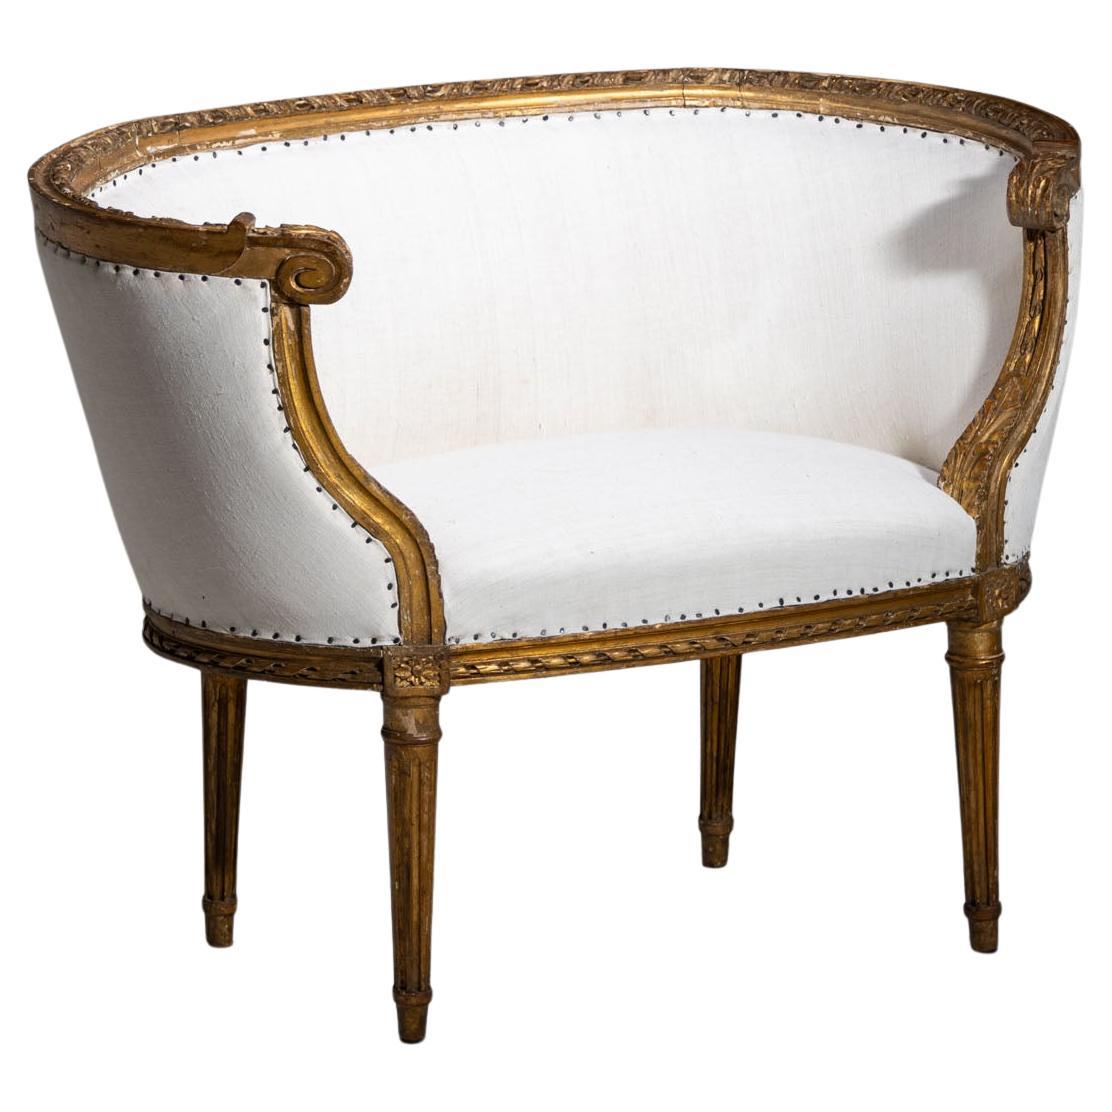 Small Bench in Louis XVI style, 19th Century